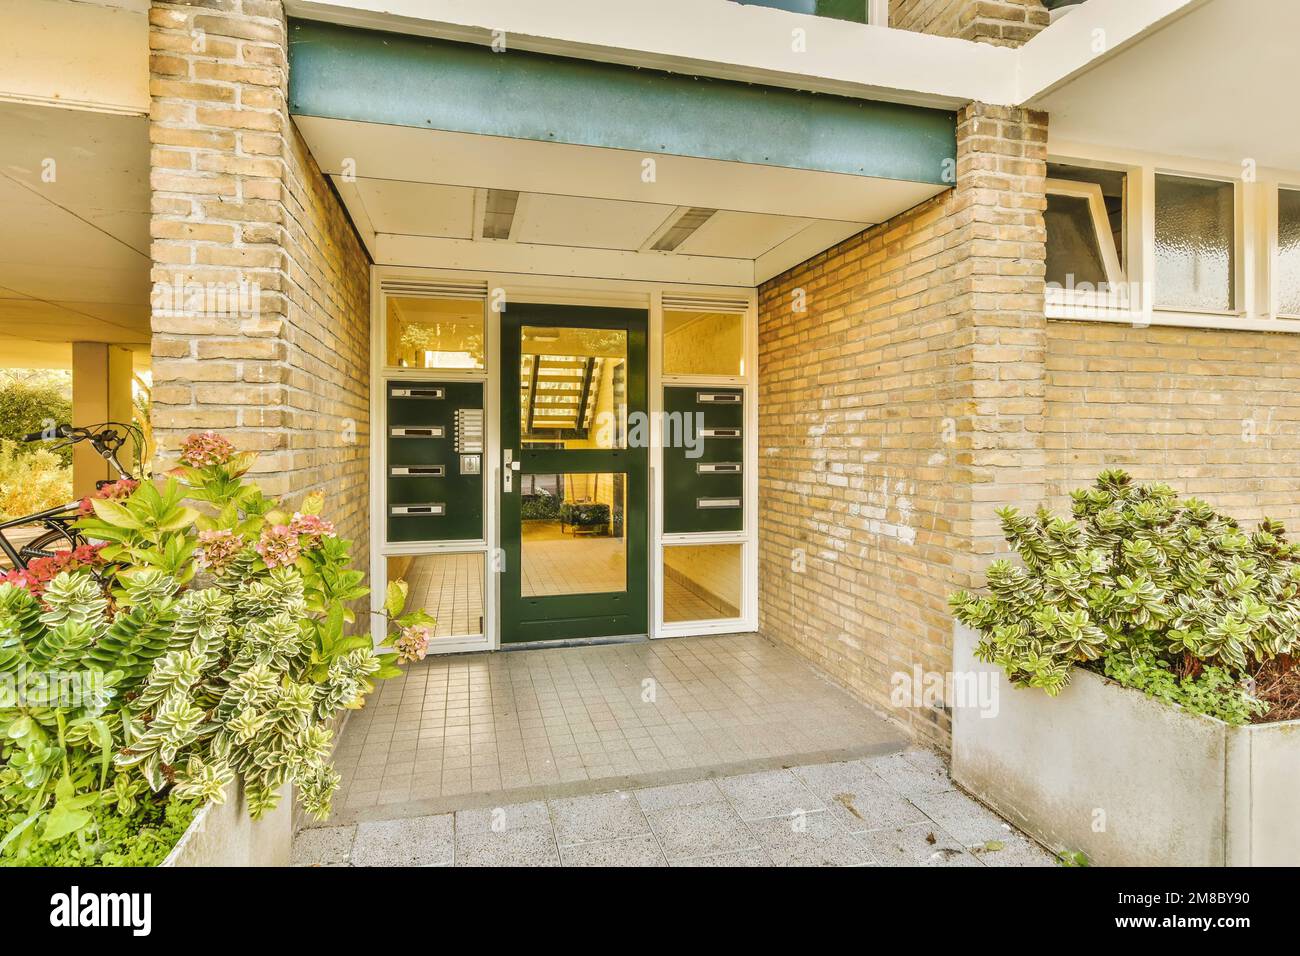 the front entrance to an apartment with green doors and plants in pots on either side of the entryway, Stock Photo